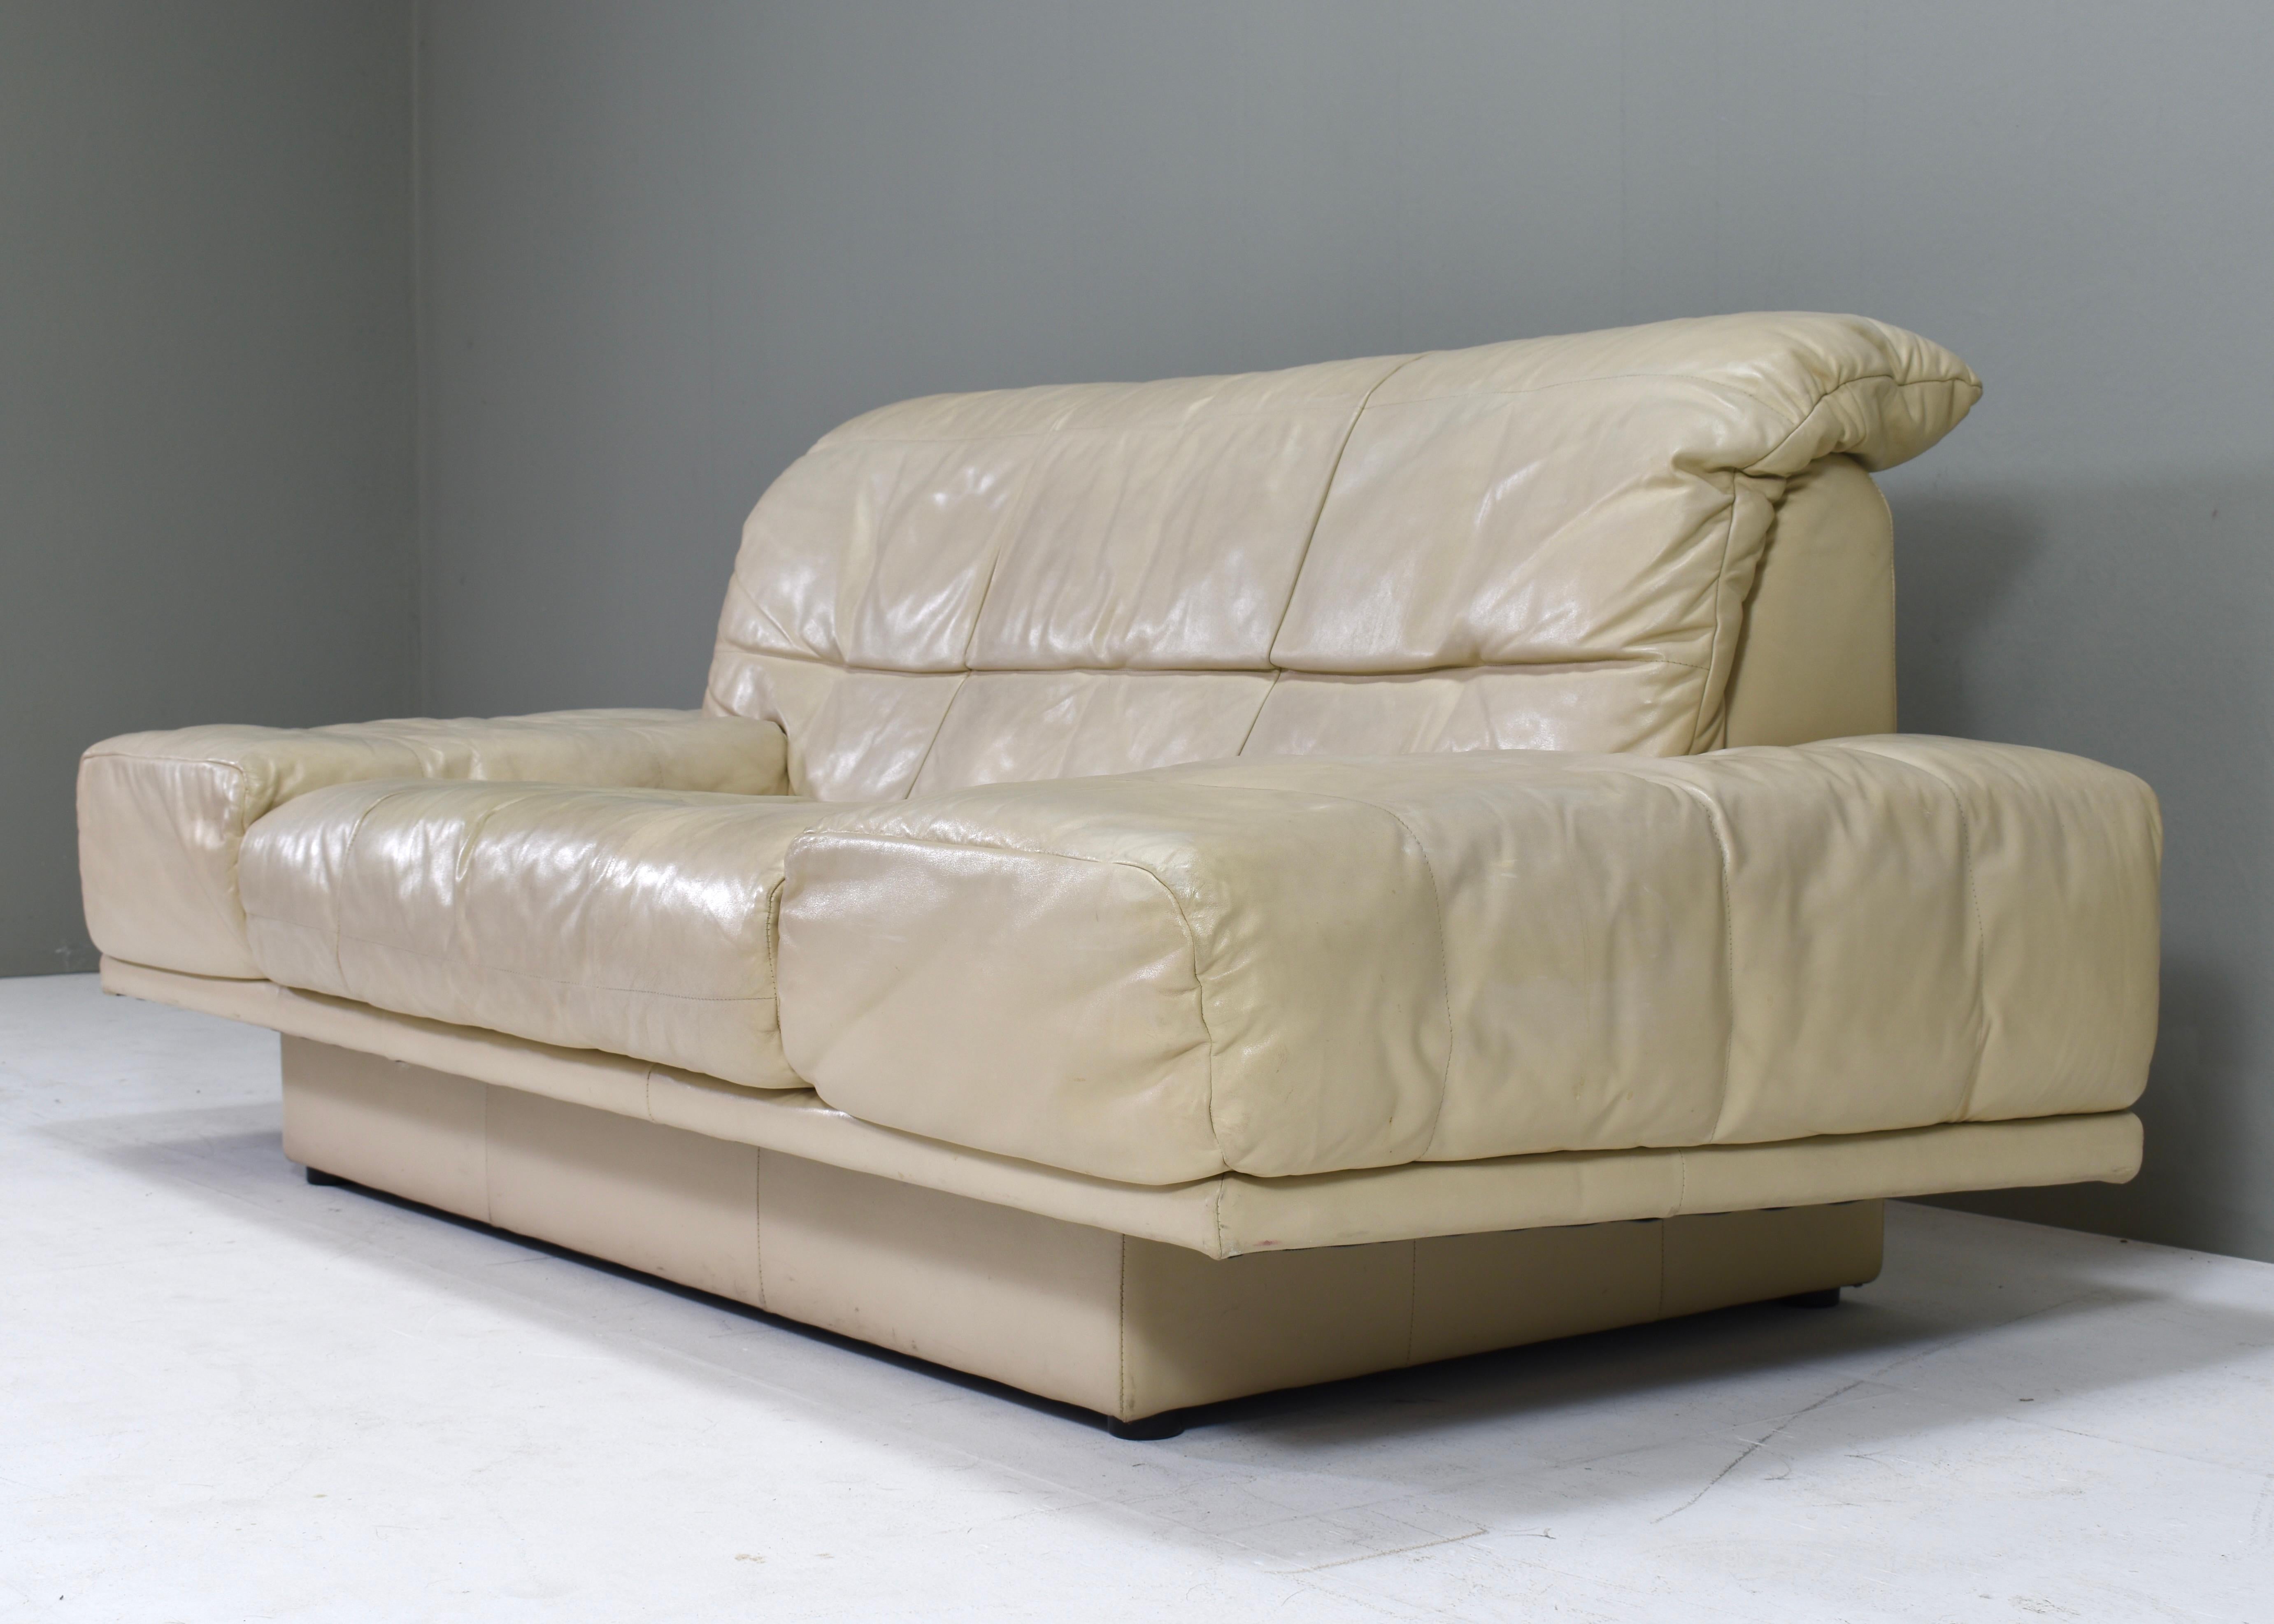 Rolf Benz 2-seat sofa in Ivory Cream White Leather – Germany, circa 1980-1990 For Sale 6